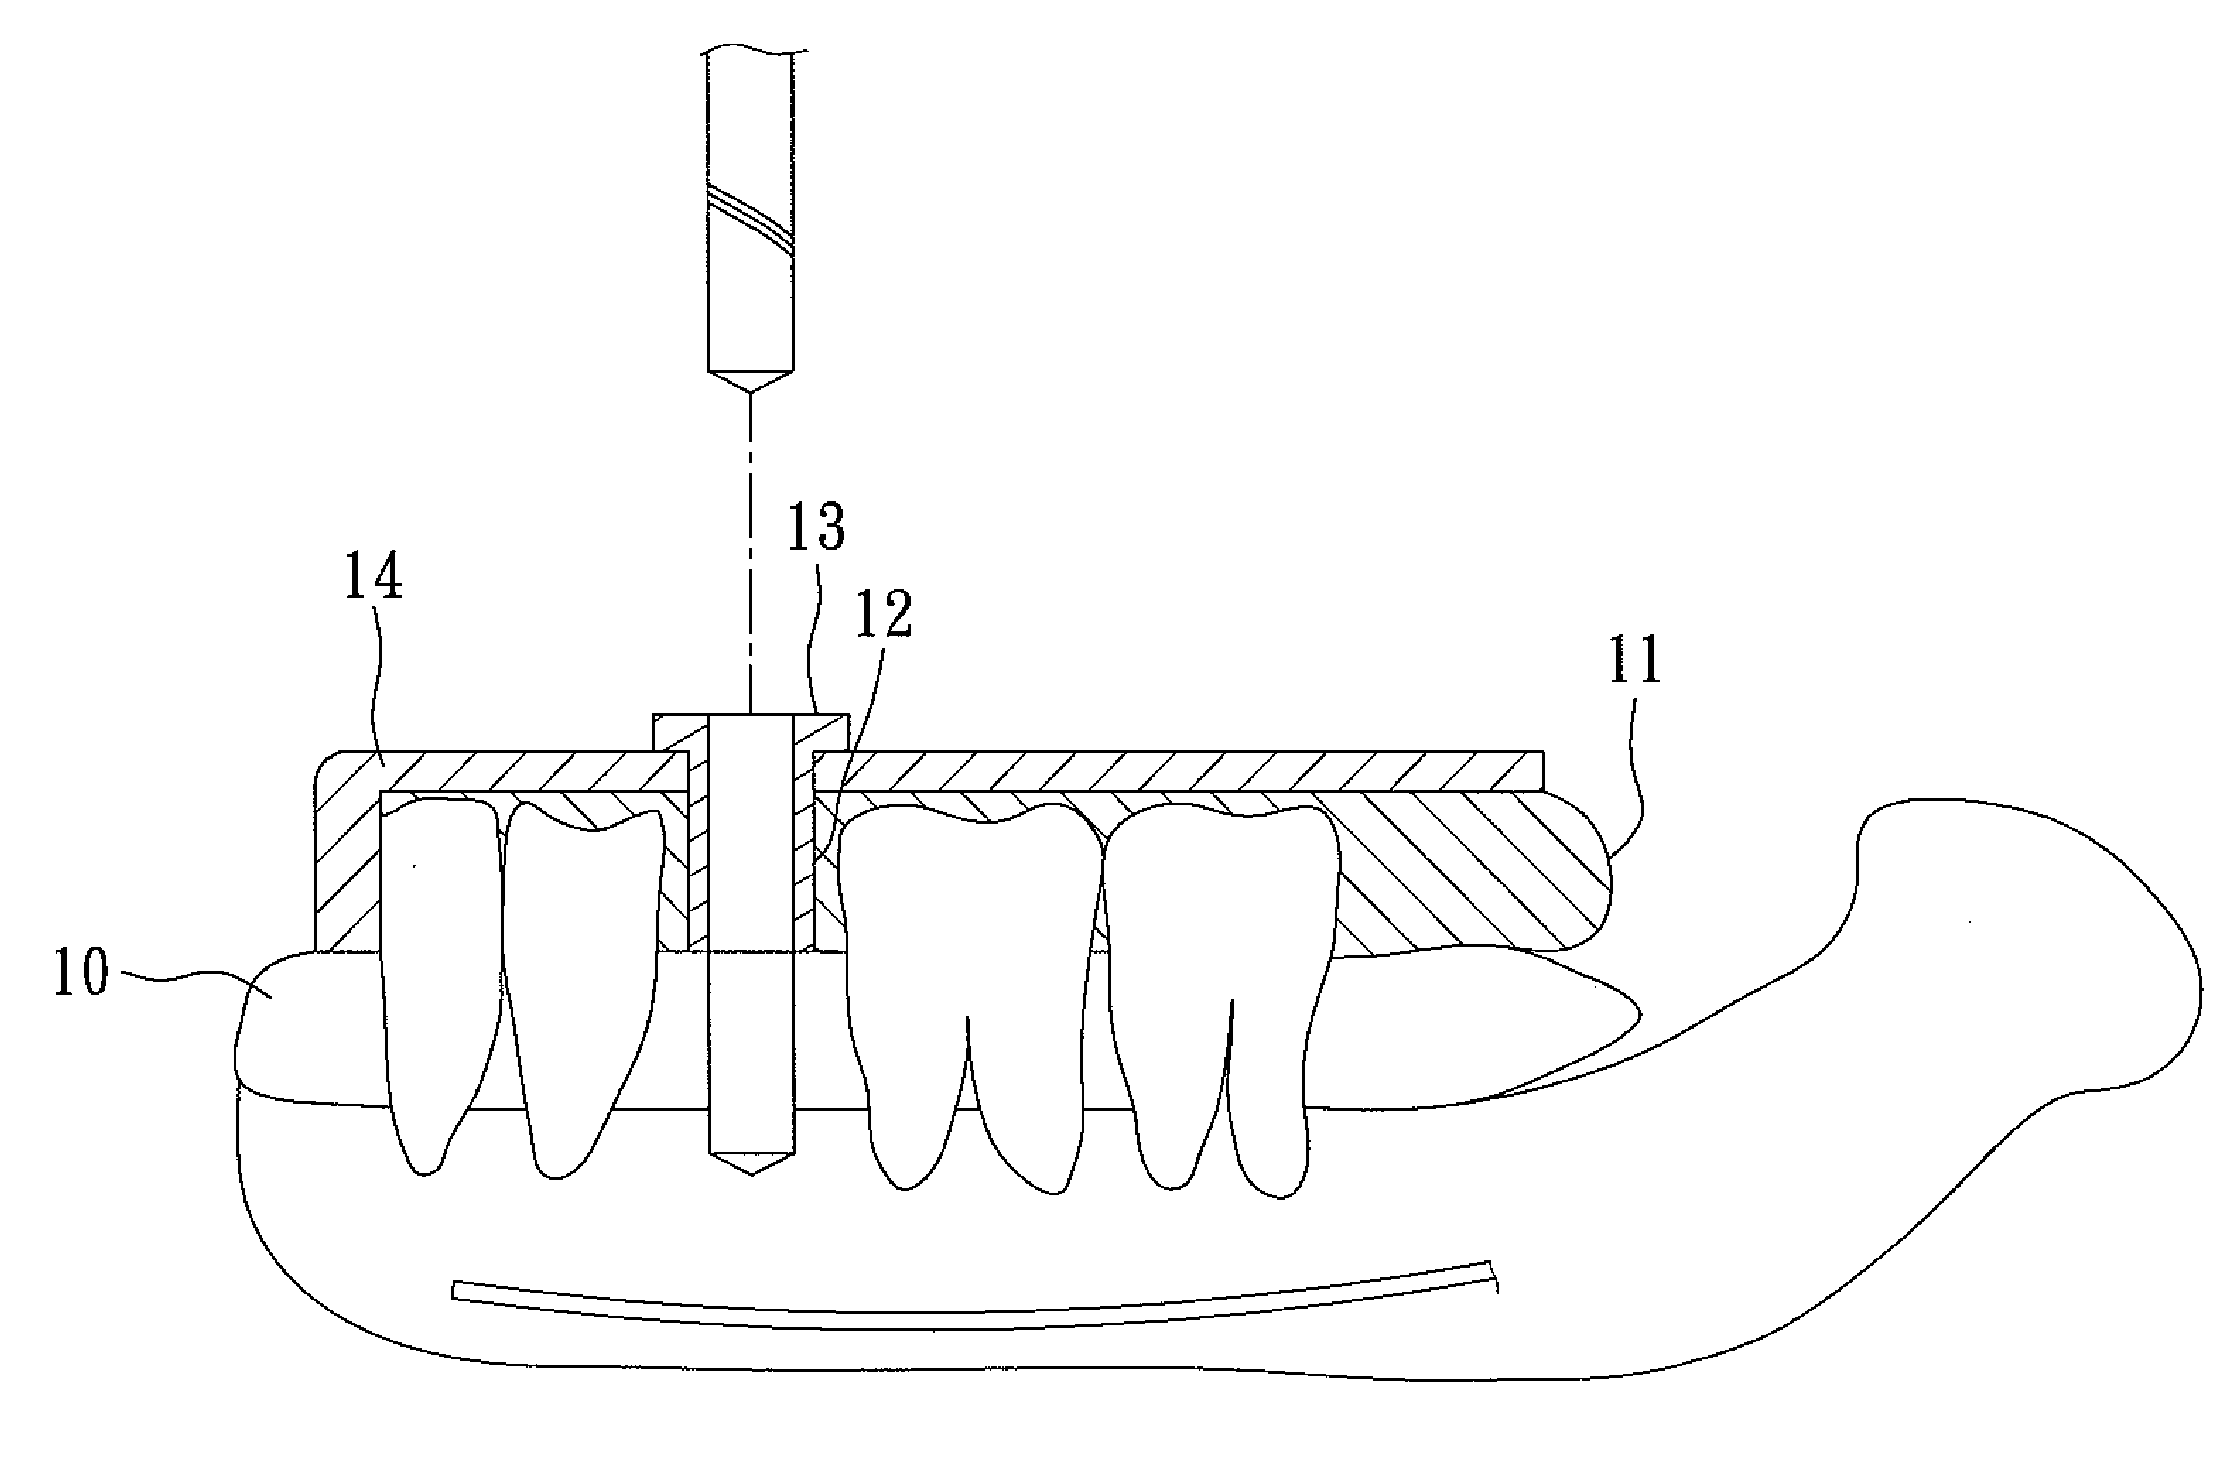 Method of making a surgical template used for a computer-guided dental implant surgery